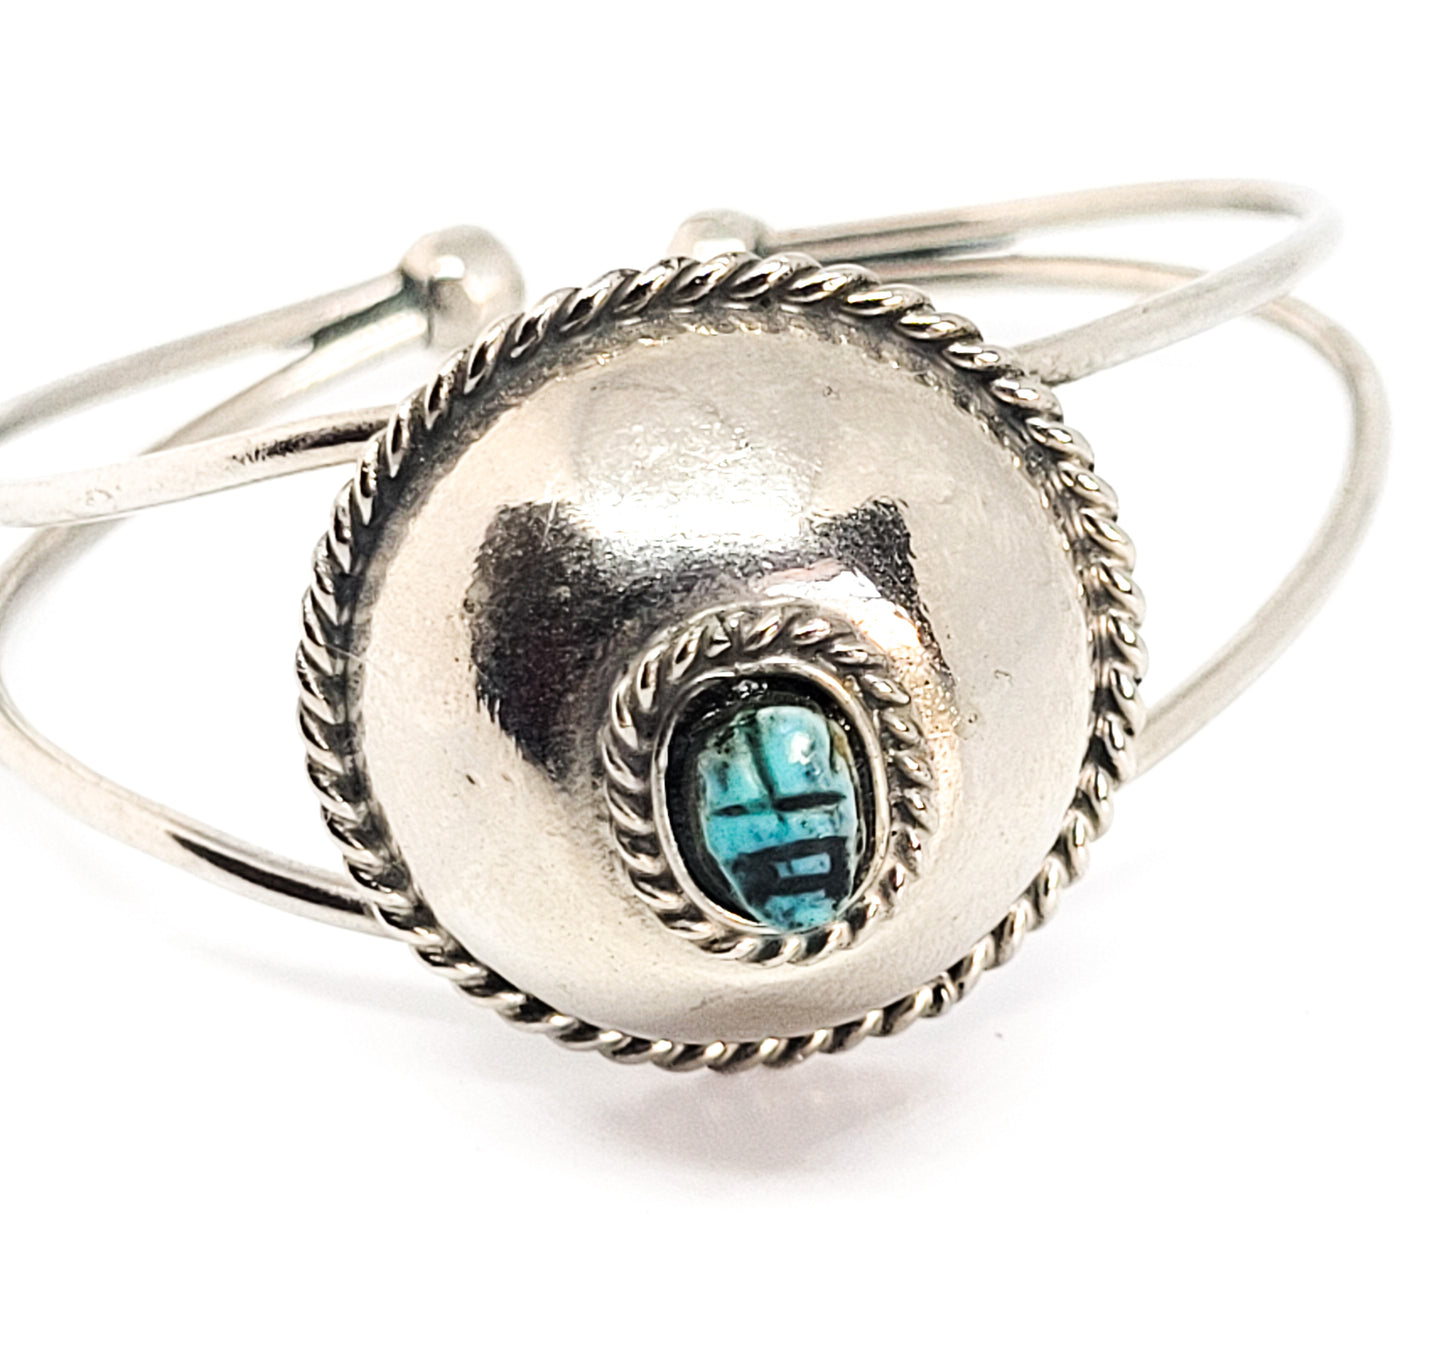 Egyptian Revival Scarab fince blue cab vintage silver toned cuff bracelet